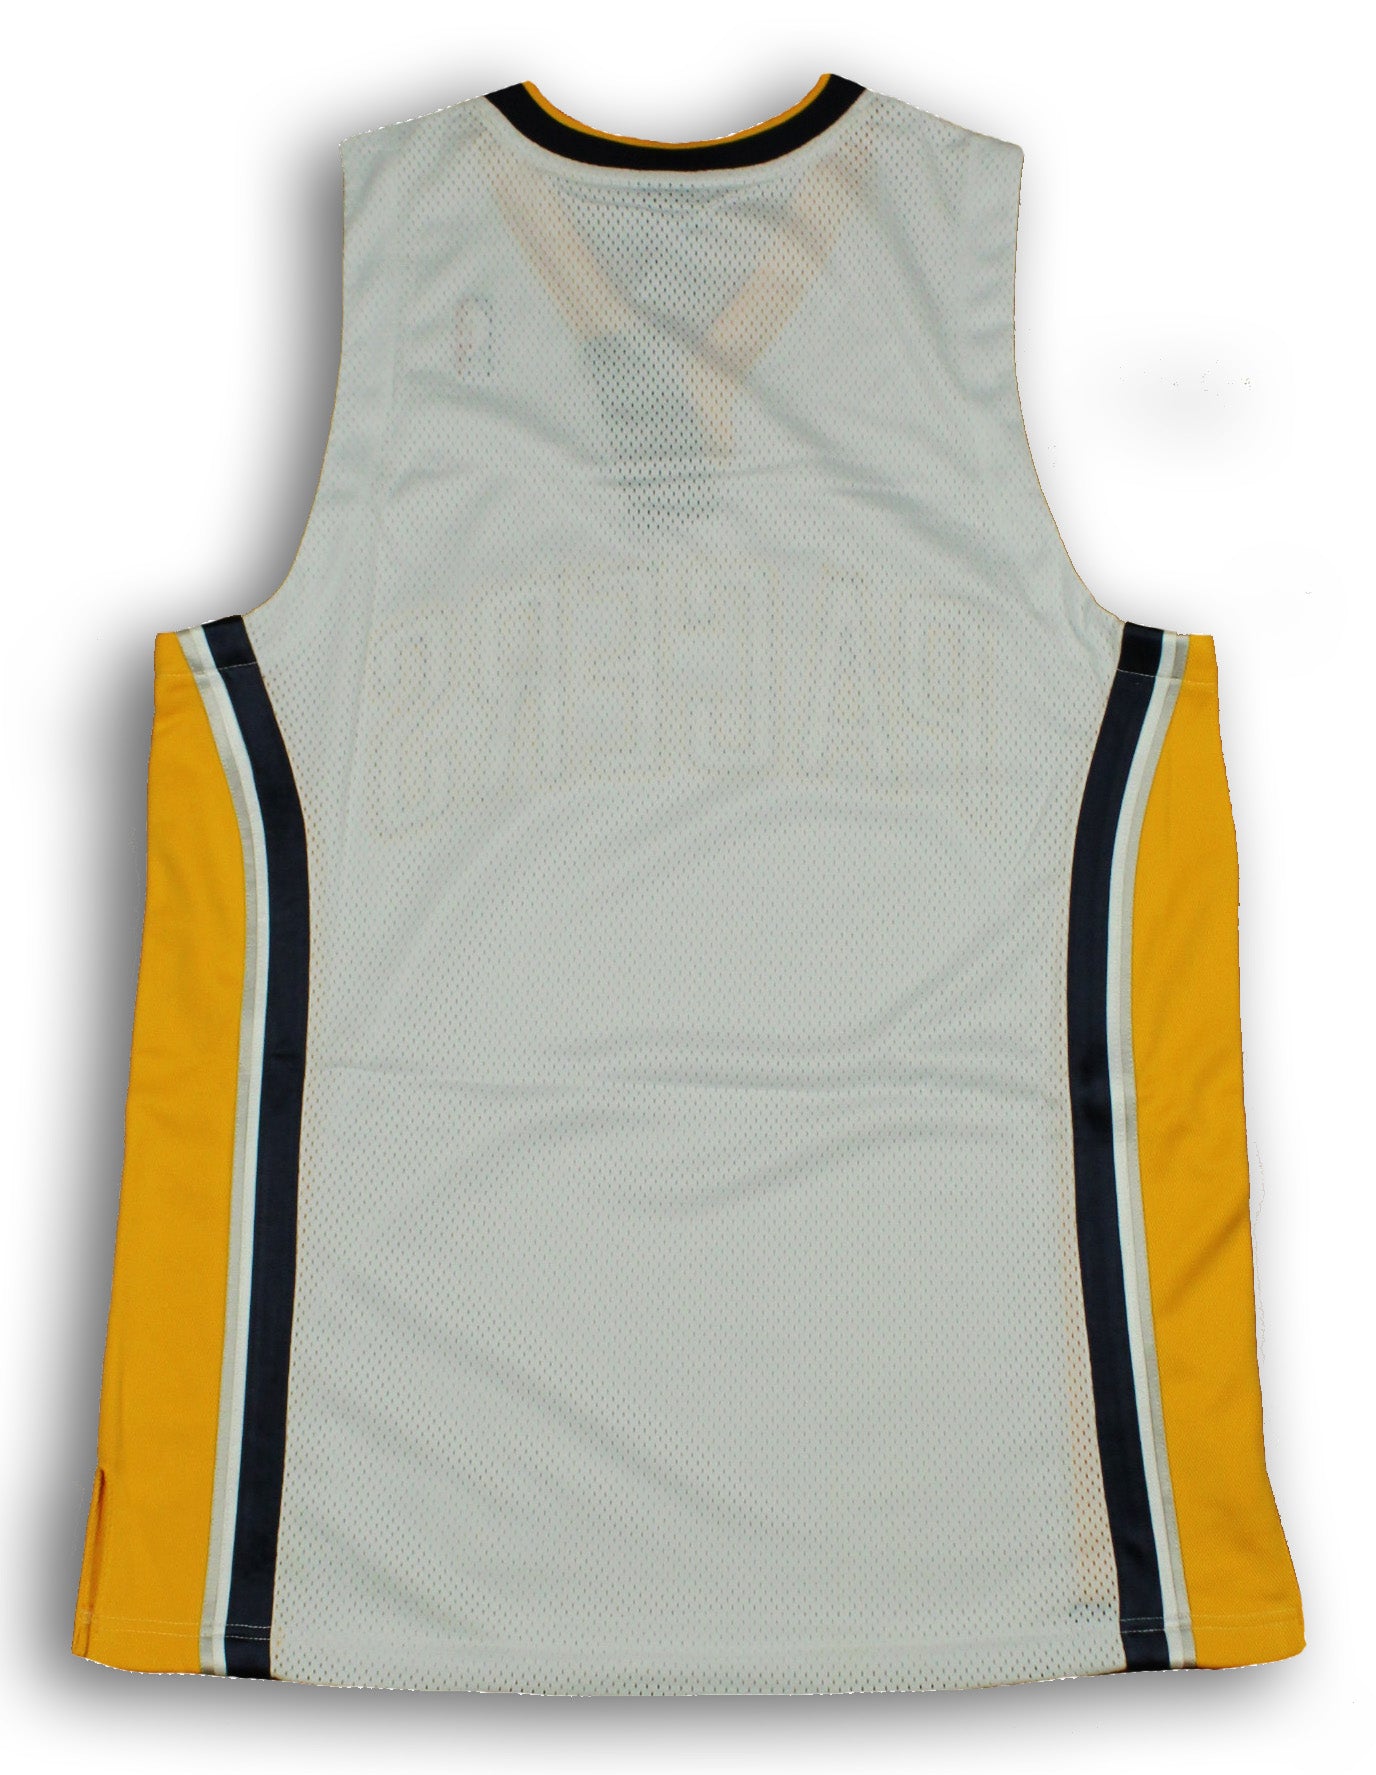 indiana pacers jersey white